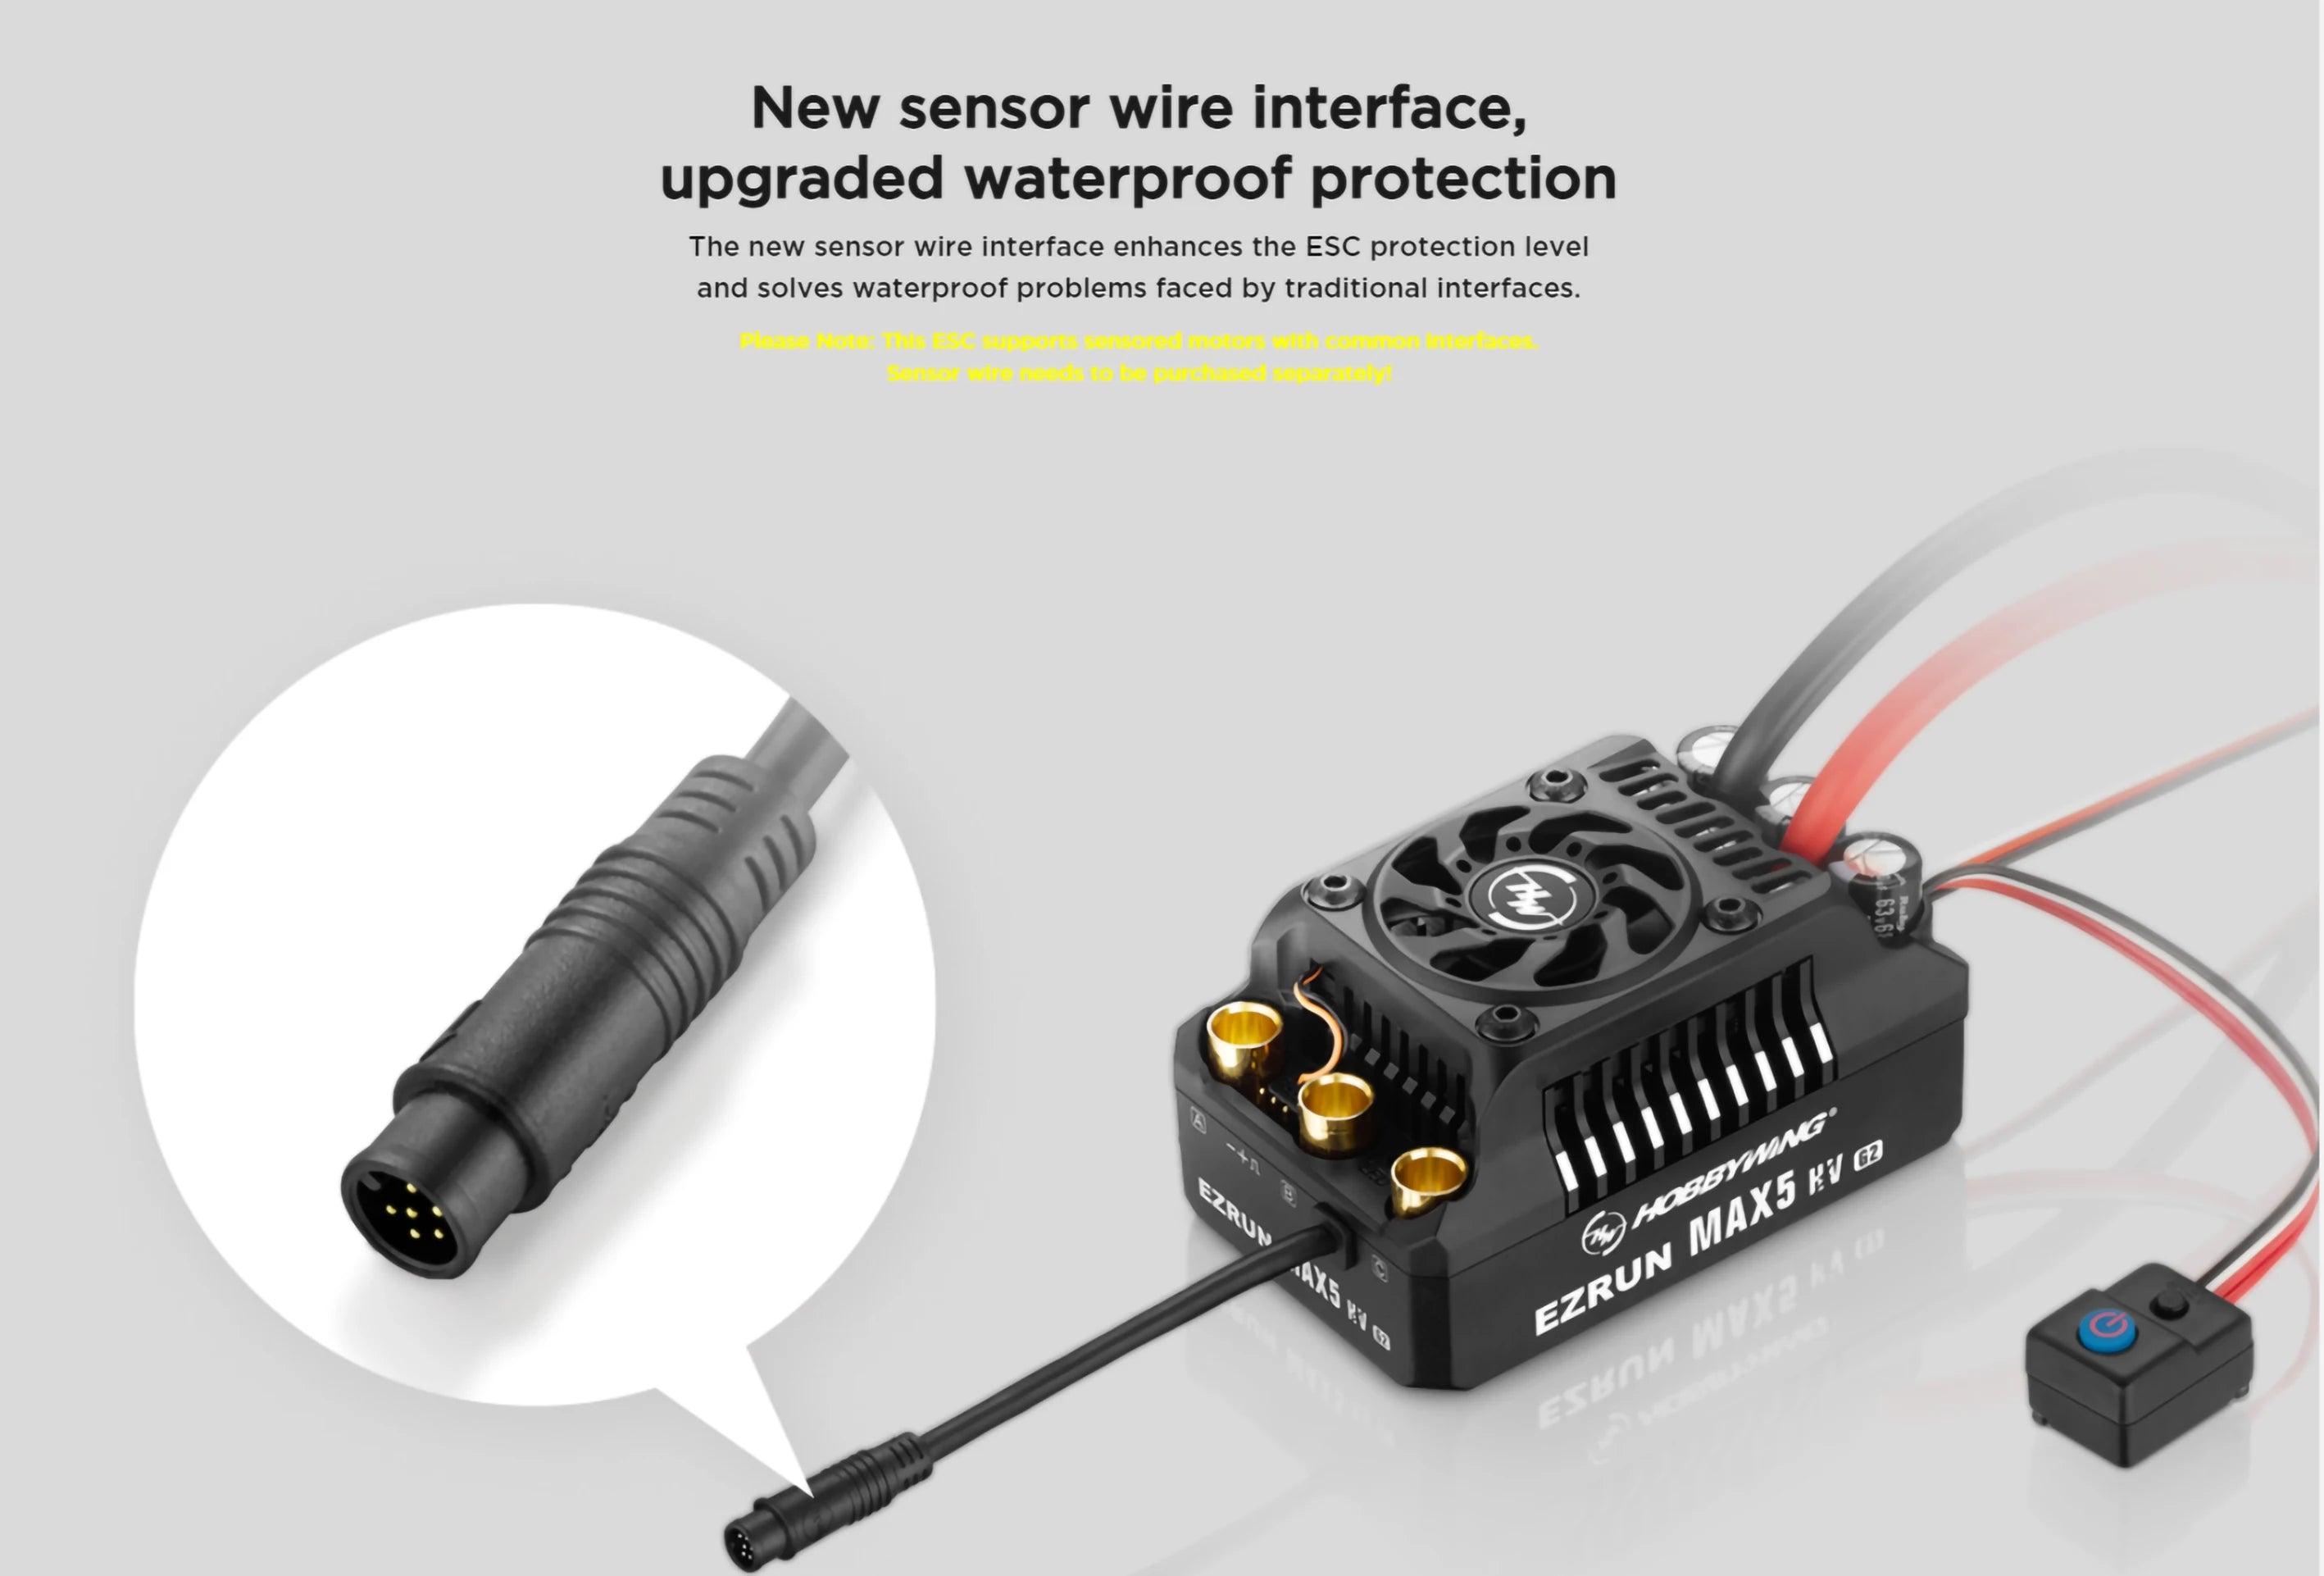 Hobbywing EZRUN MAX5 HV G2 ESC, the new sensor wire interface enhances the ESC protection level and solves waterproof problems .